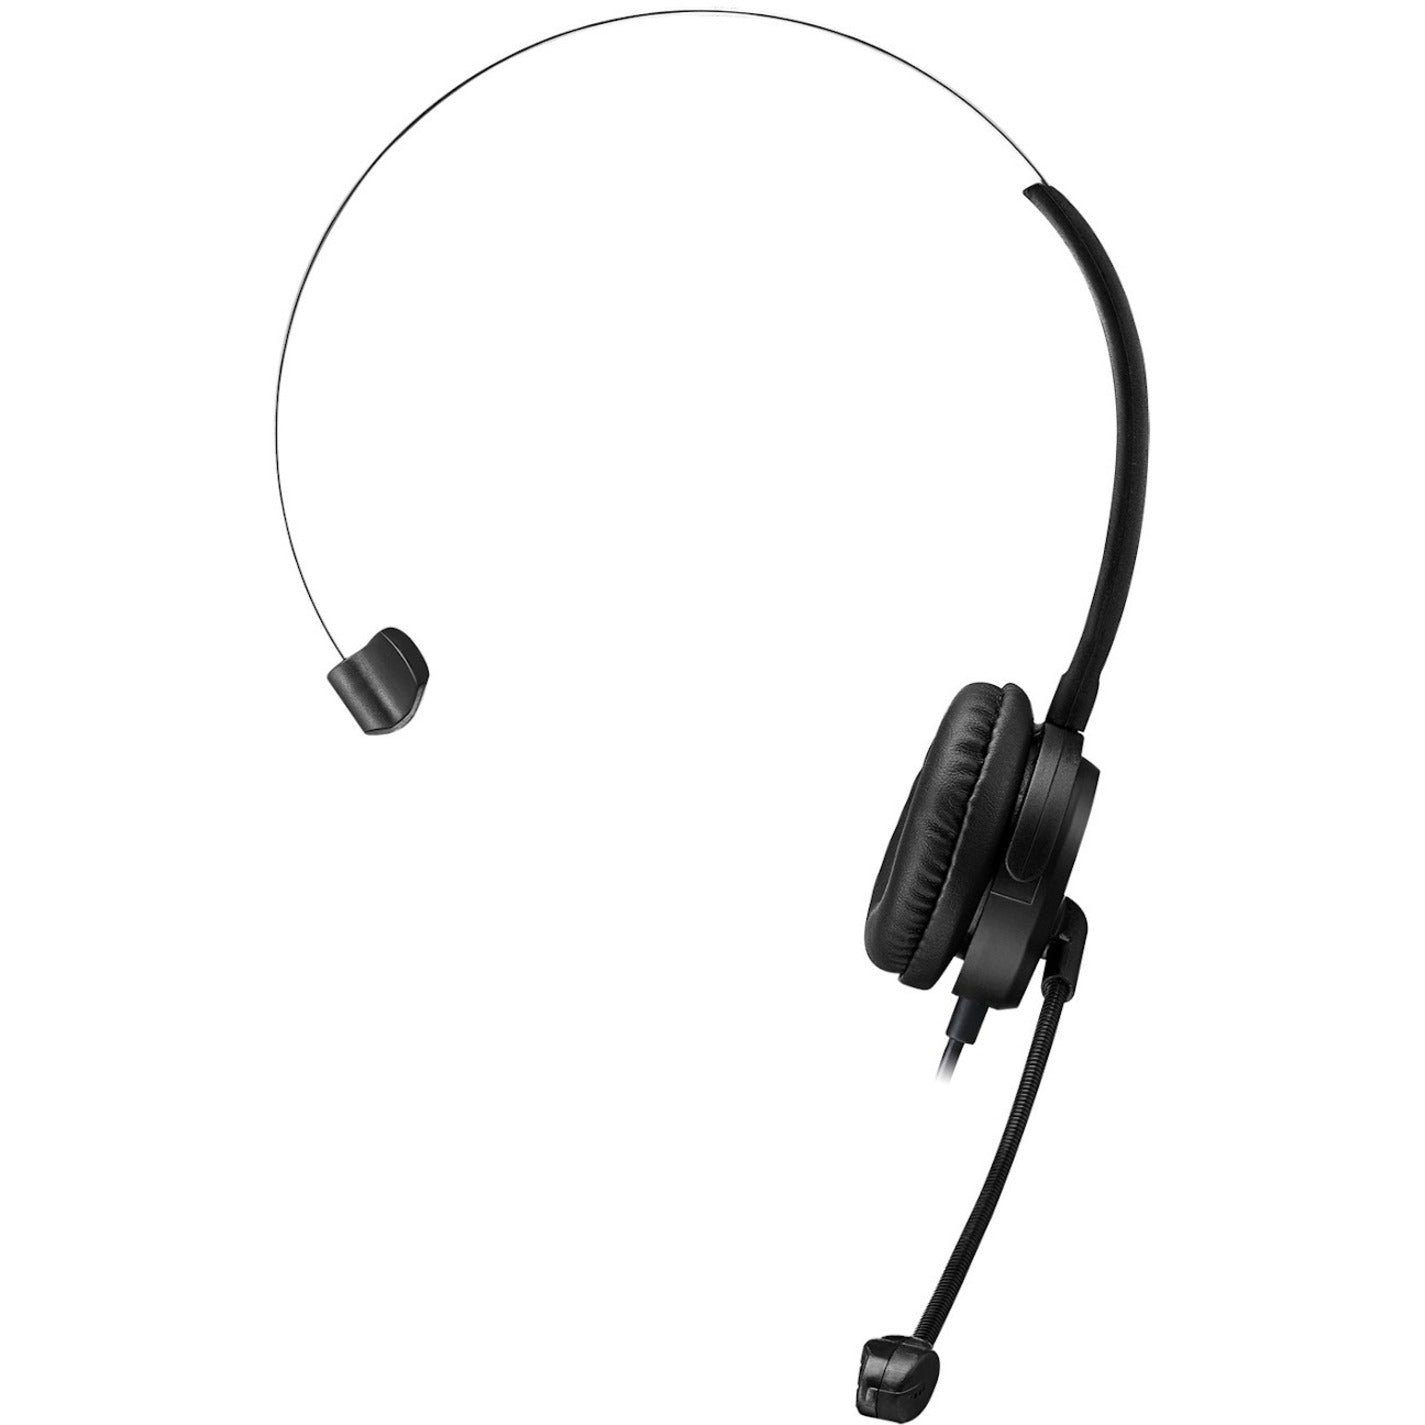 Adesso XTREAM P1 USB Single-Sided Headset with Adjustable Microphone Wired Mono Headset